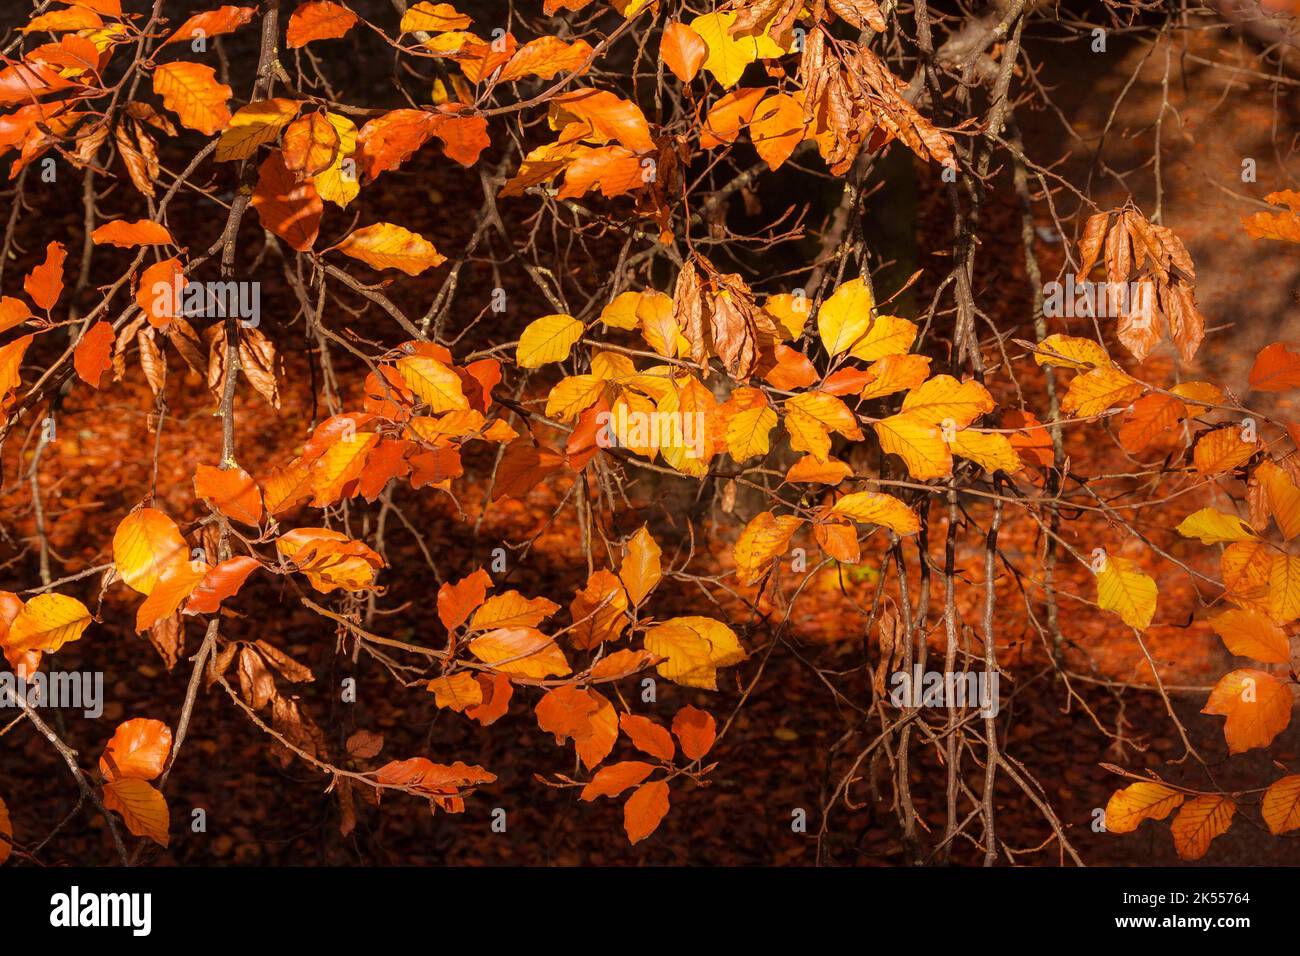 Autumnal golden and orange leaves and foliage as background Stock Photo